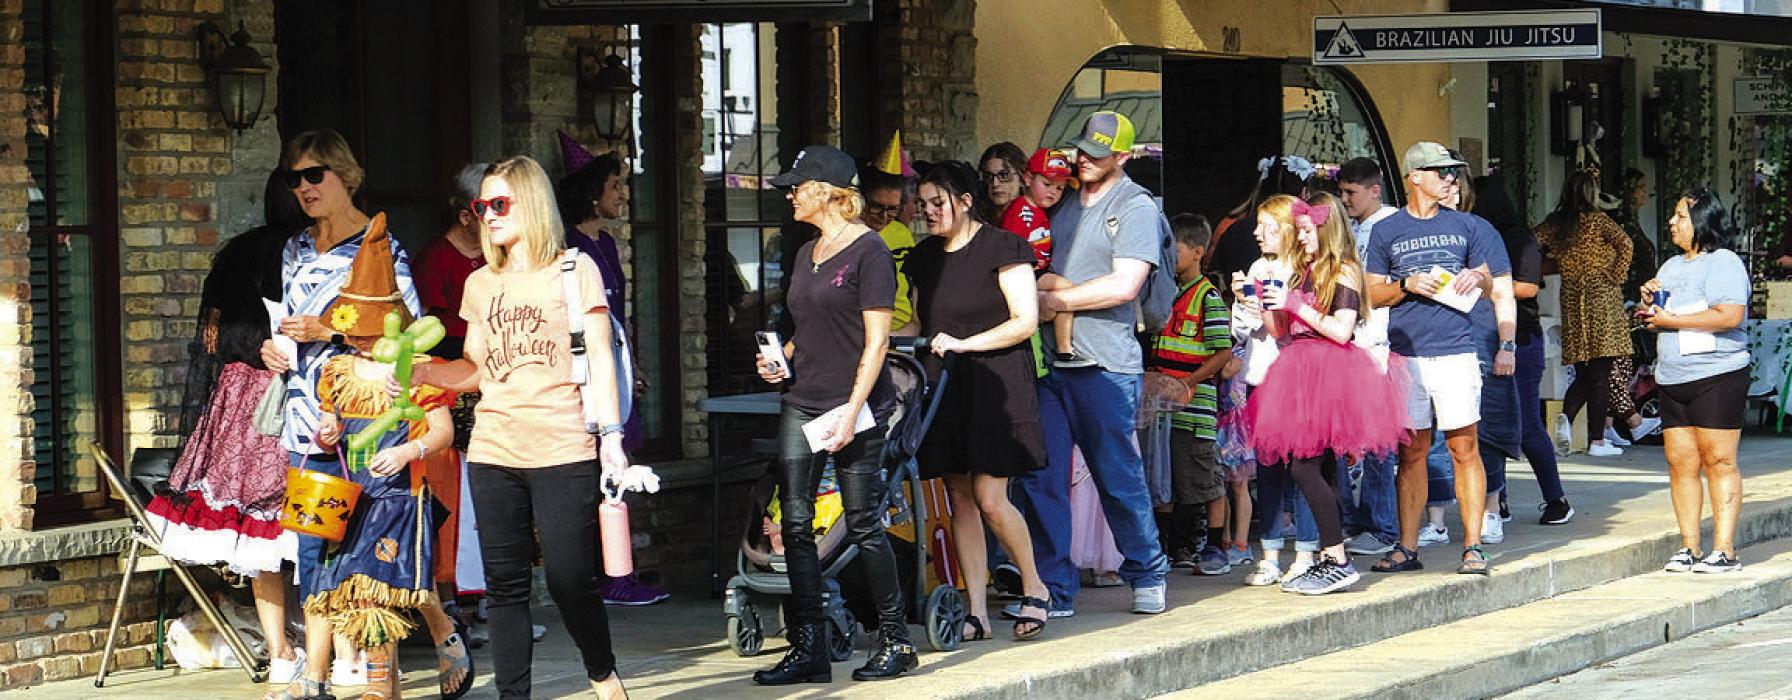 Parents and kids from La Grange and across the area came to the Courthouse Square on Monday for Main Street’s annual Trick-or-Treat on the Square for Halloween.